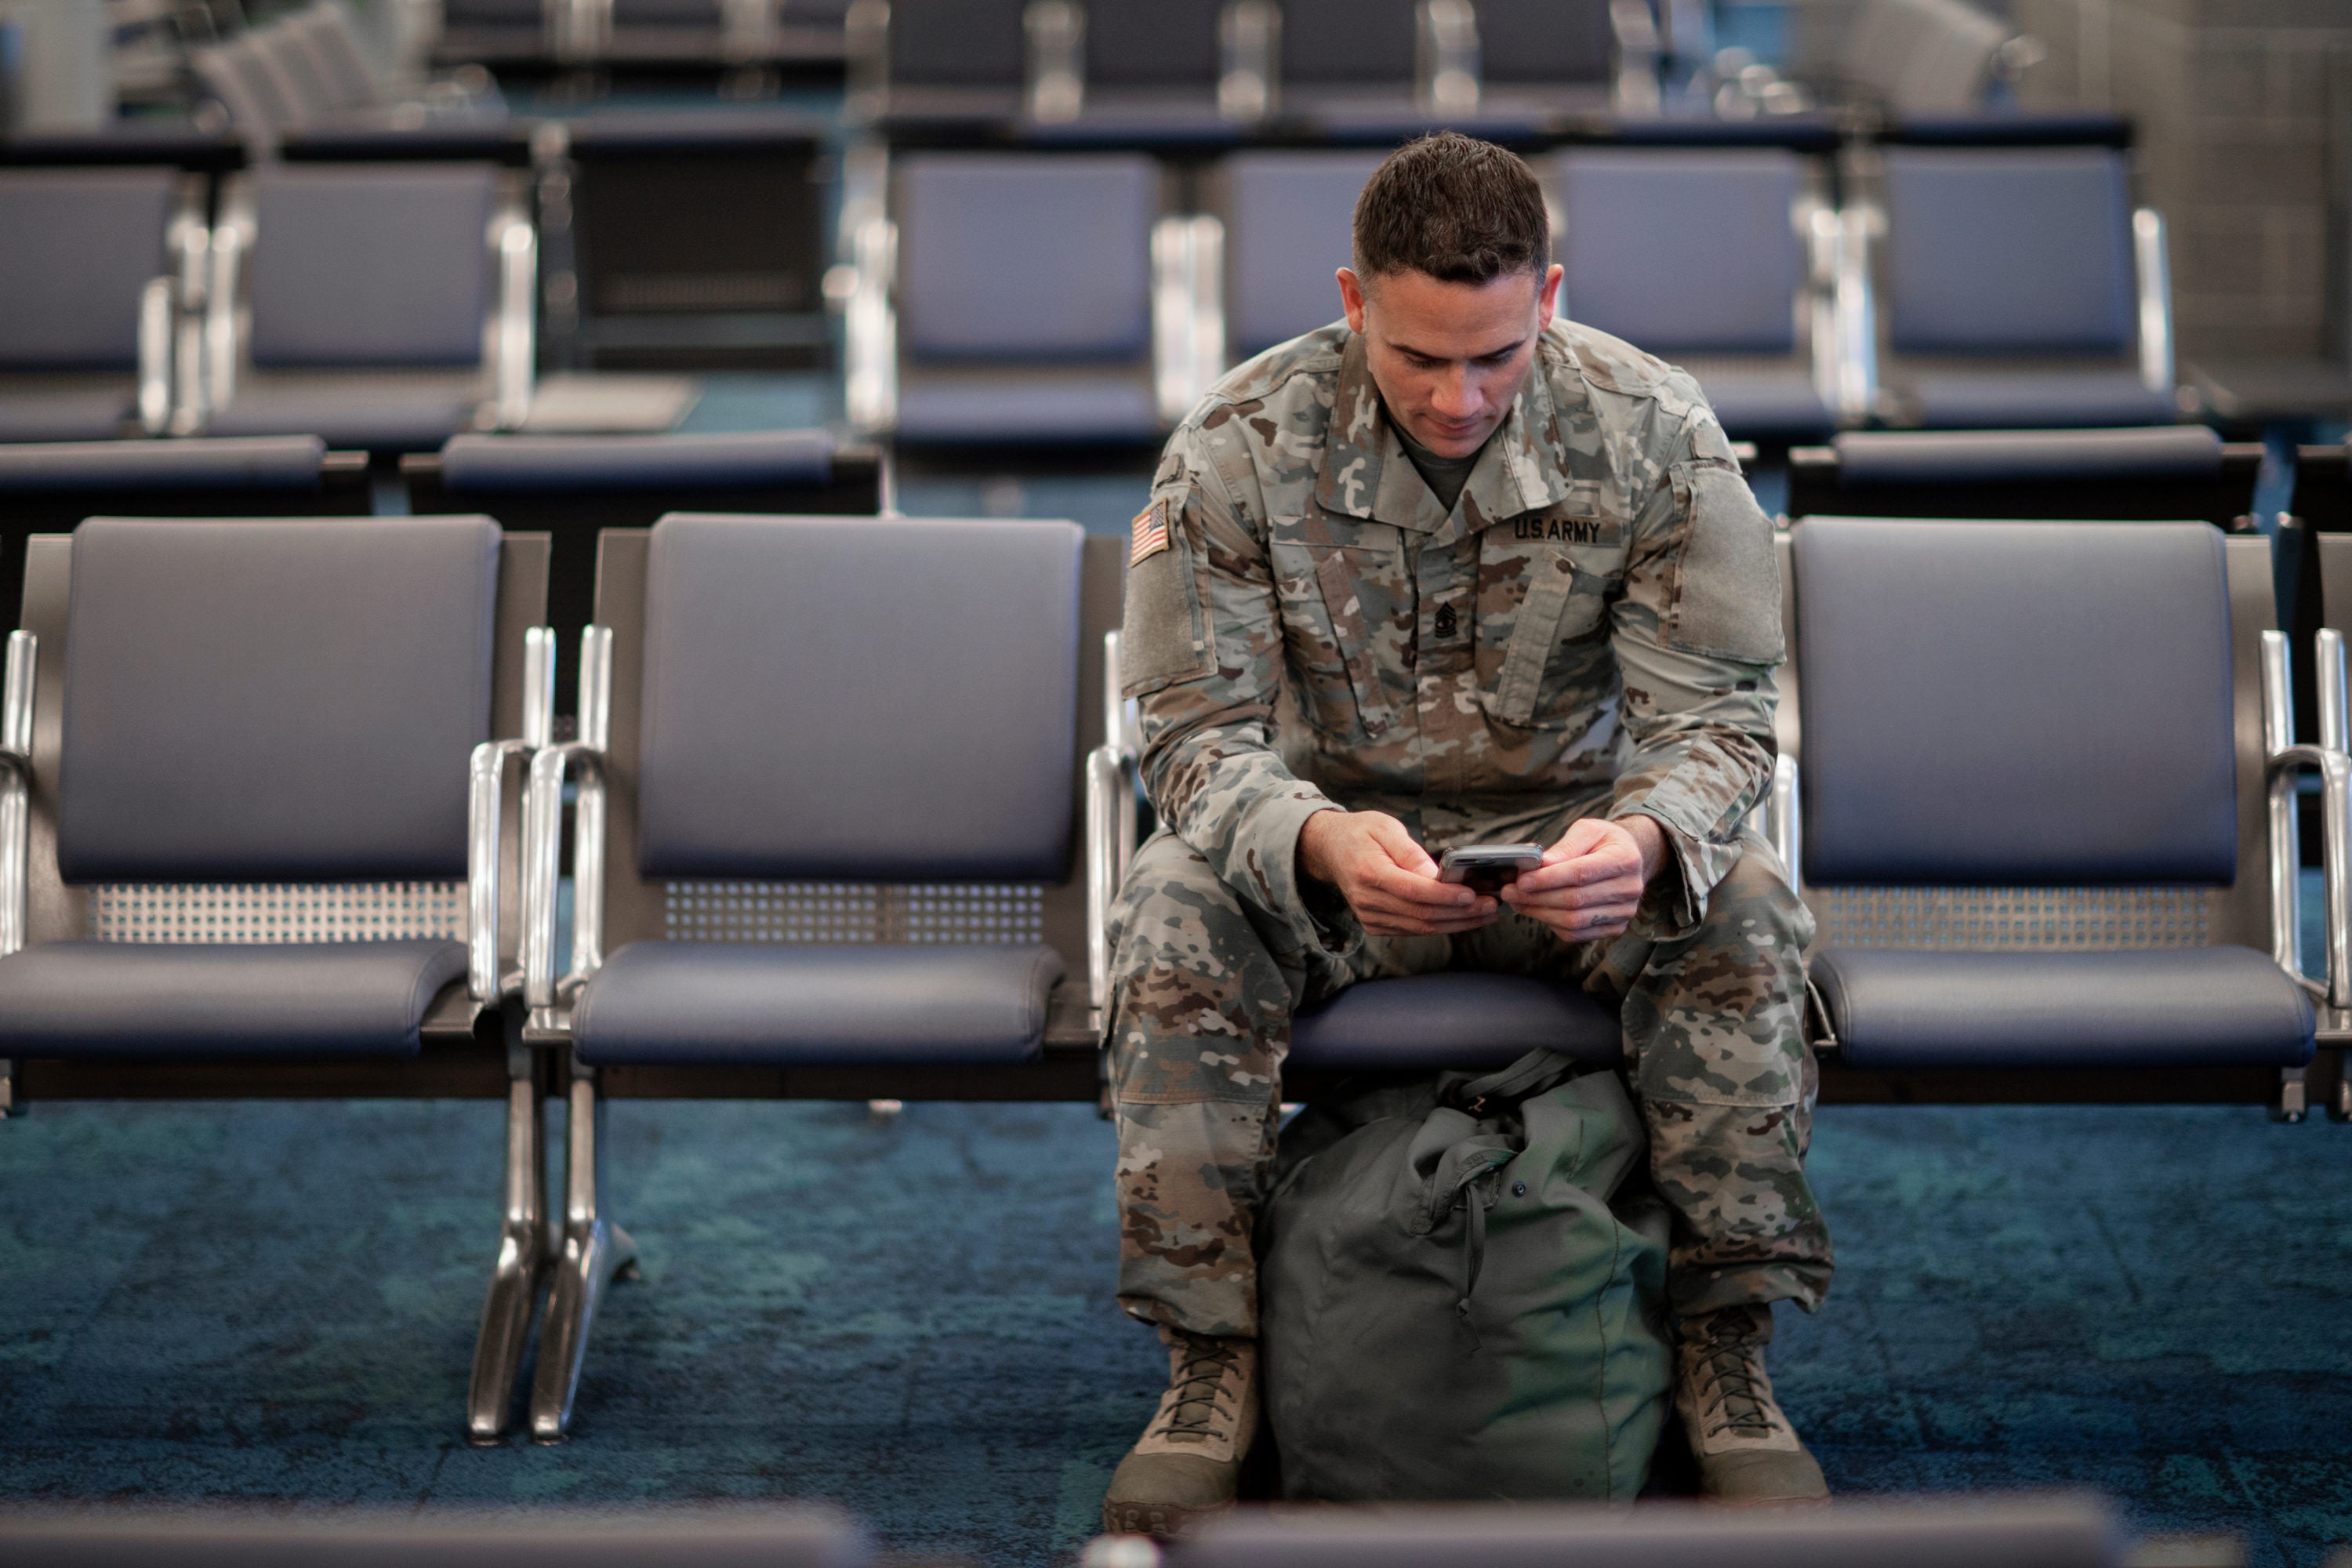 Soldier looking at his cell phone while waiting at an airport